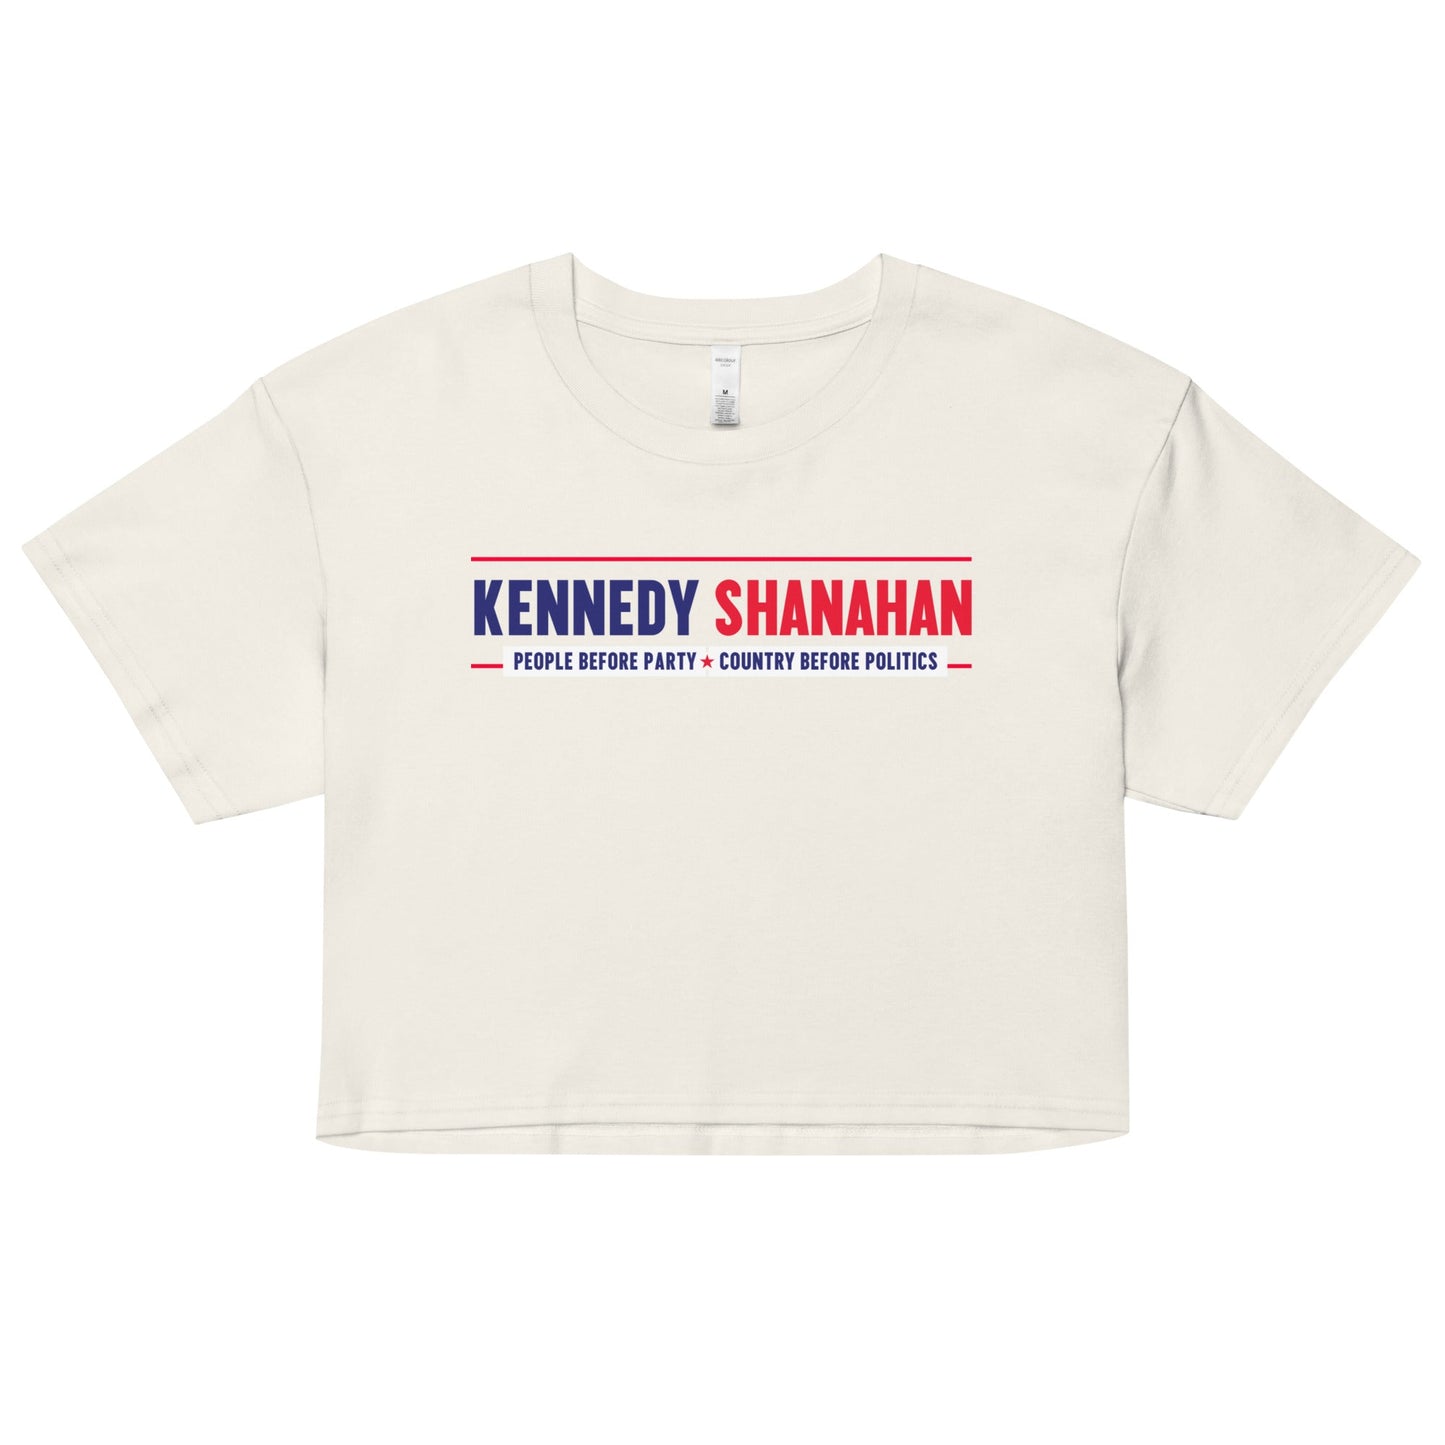 Kennedy Shanahan | People before Party, Country Before Politics Women’s Crop Top - TEAM KENNEDY. All rights reserved